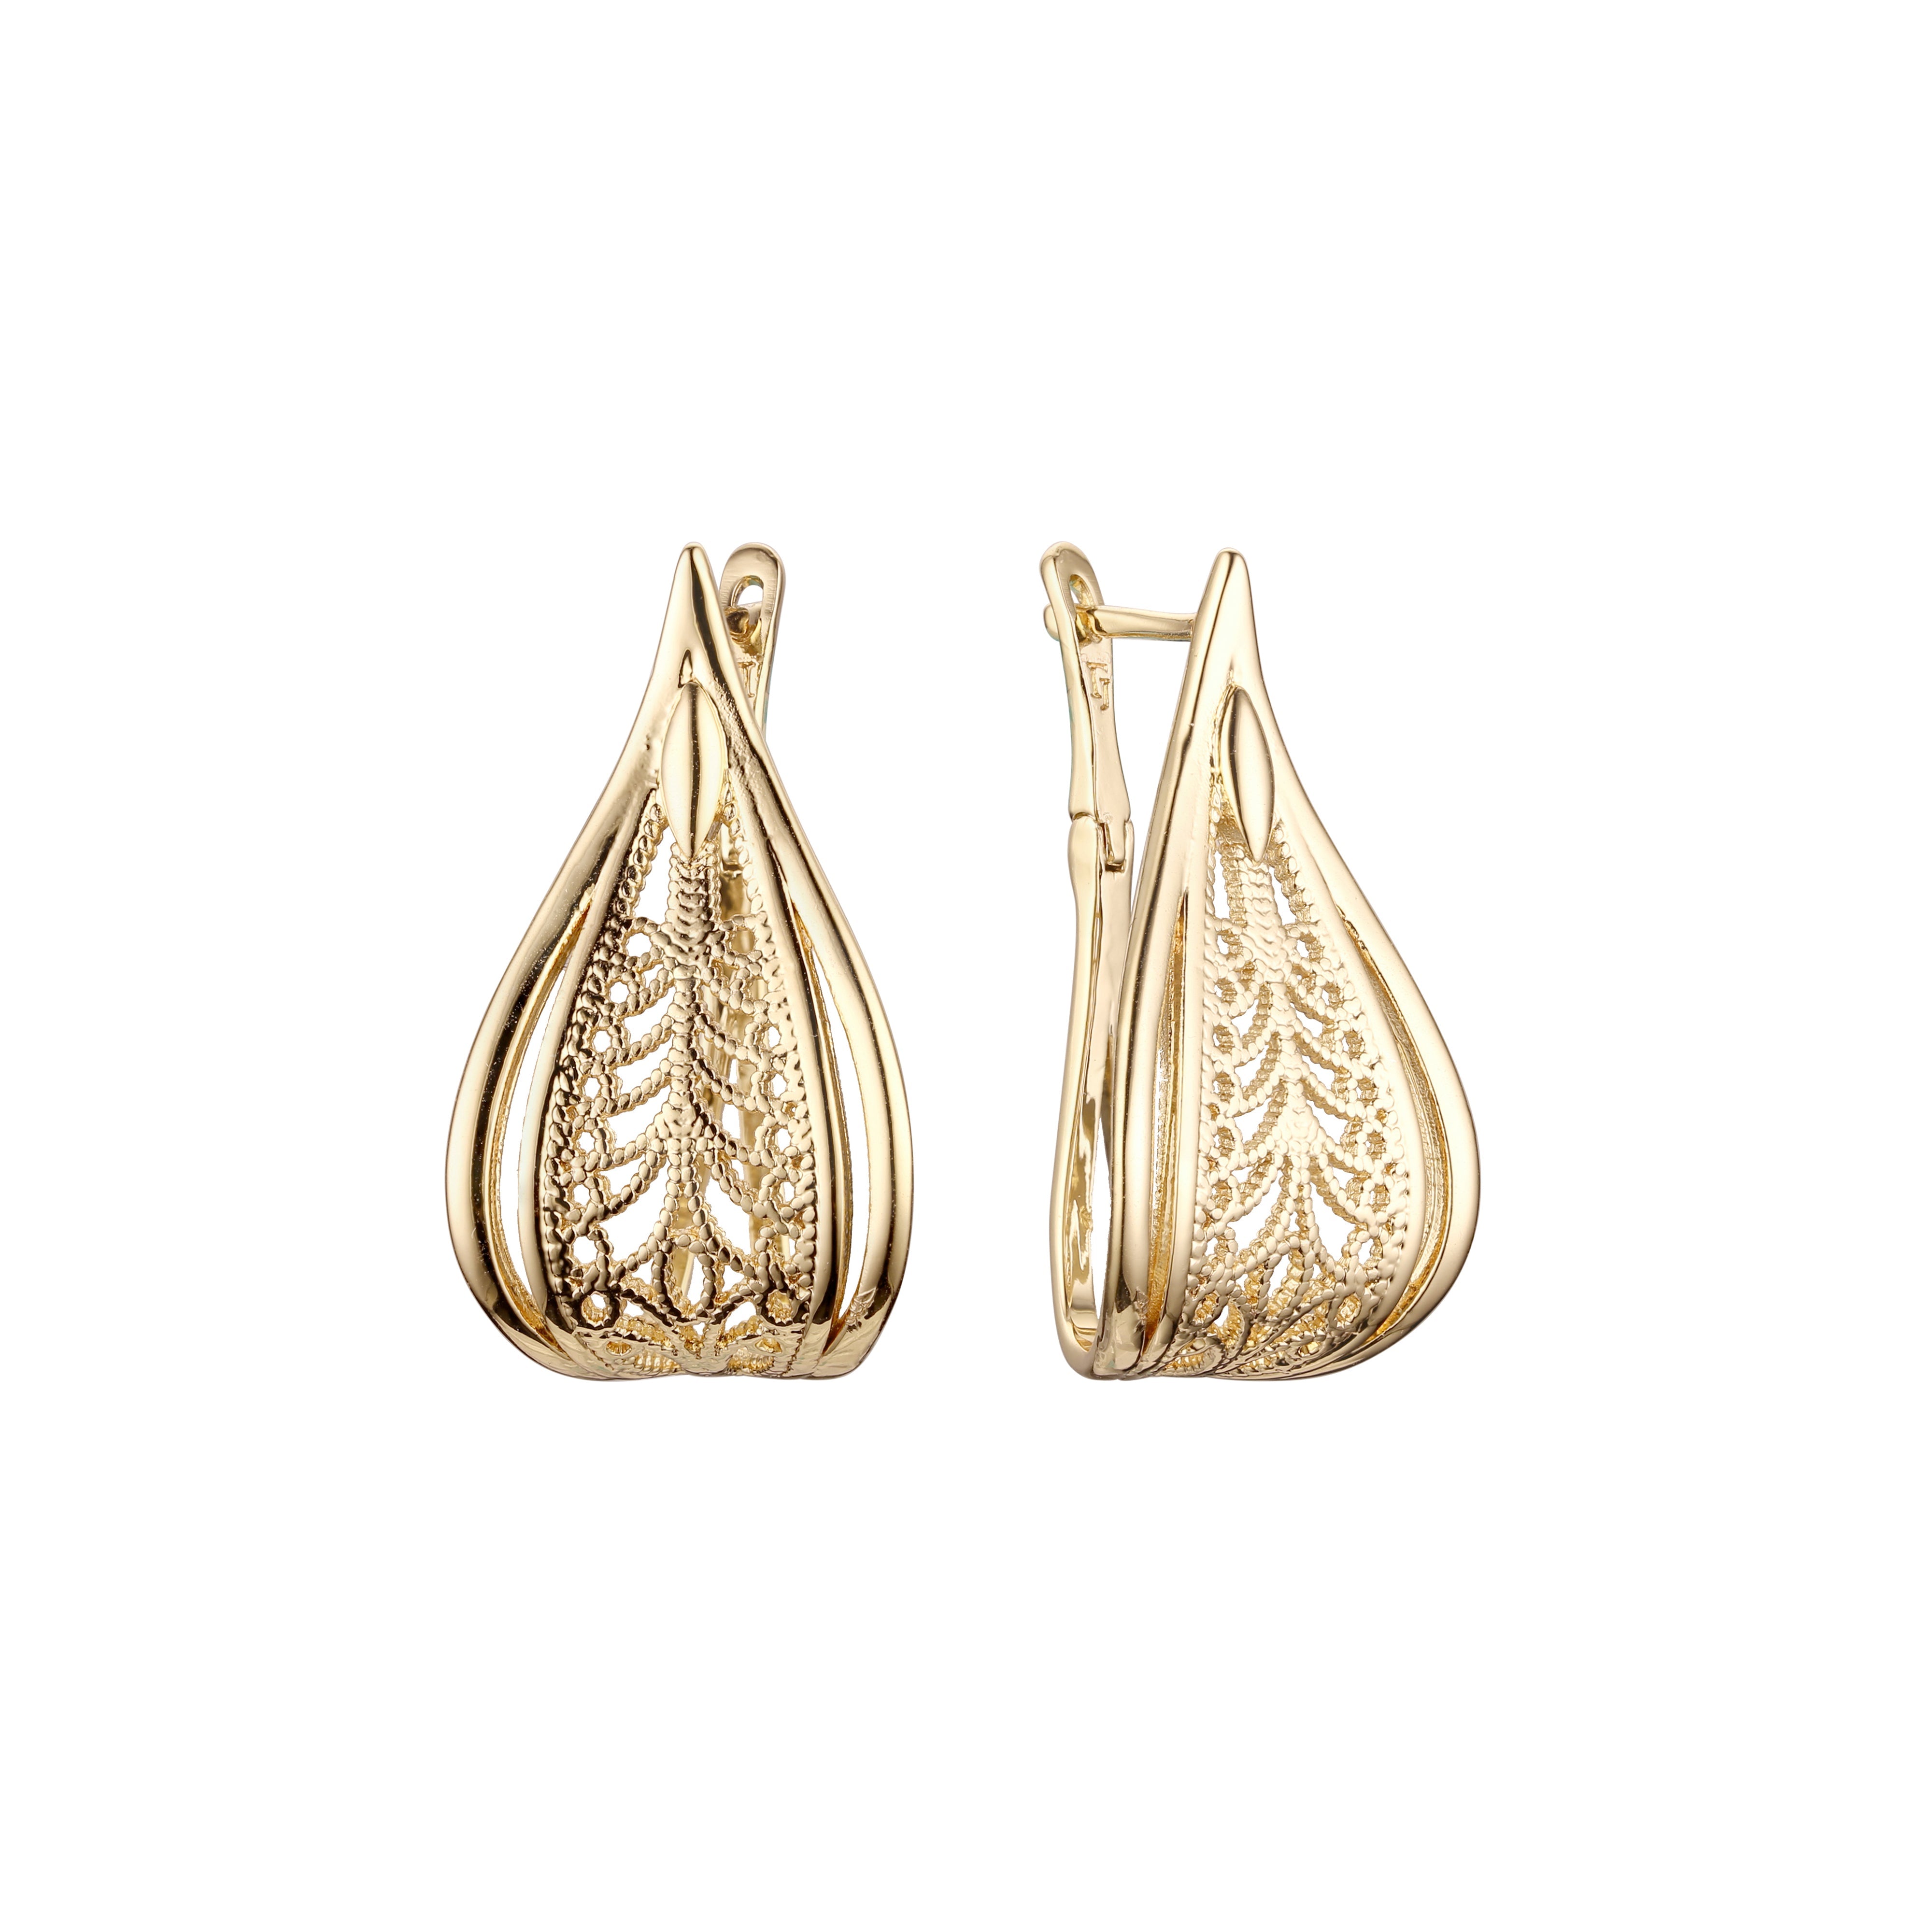 .Earrings in 14K Gold, Rose Gold, two tone plating colors